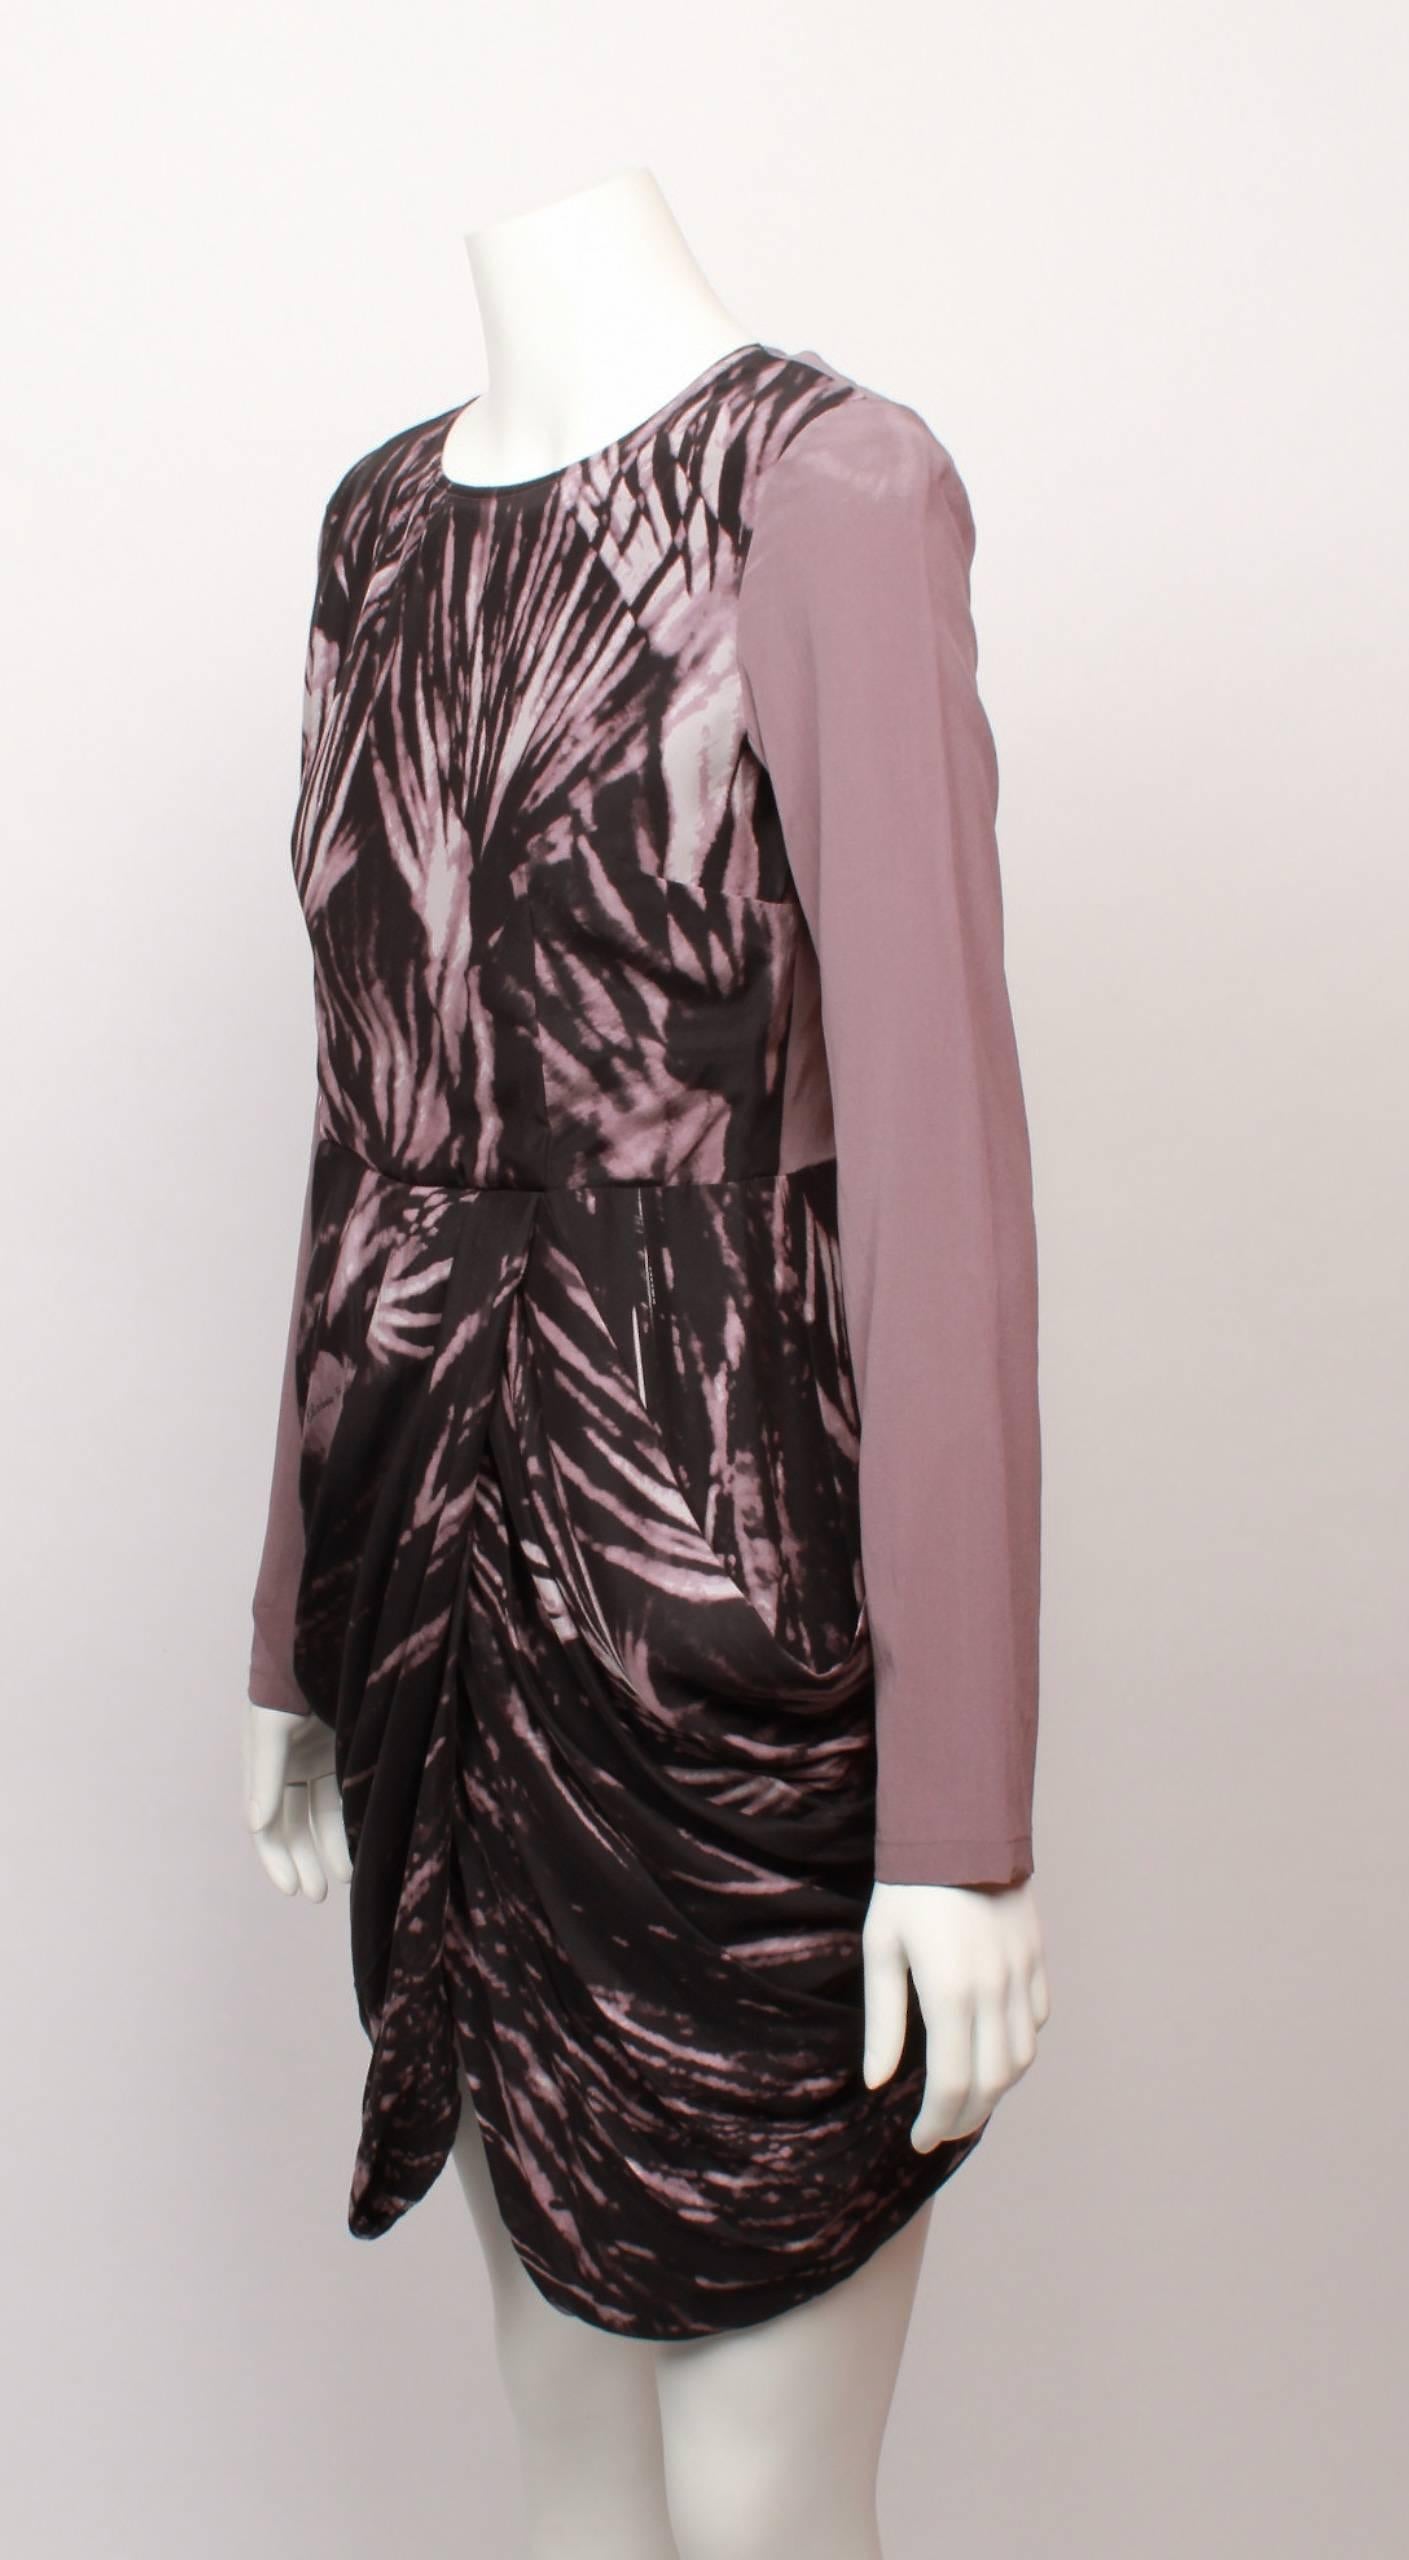 Uber cool Givenchy draped long sleeve mini dress made from tie dye print abstract leaf printed fabric in hues of chocolate and mushroom. The long fitted sleeves and back are in a contrasting solid mushroom coloured fabric. 
Bodice is a fitted shell